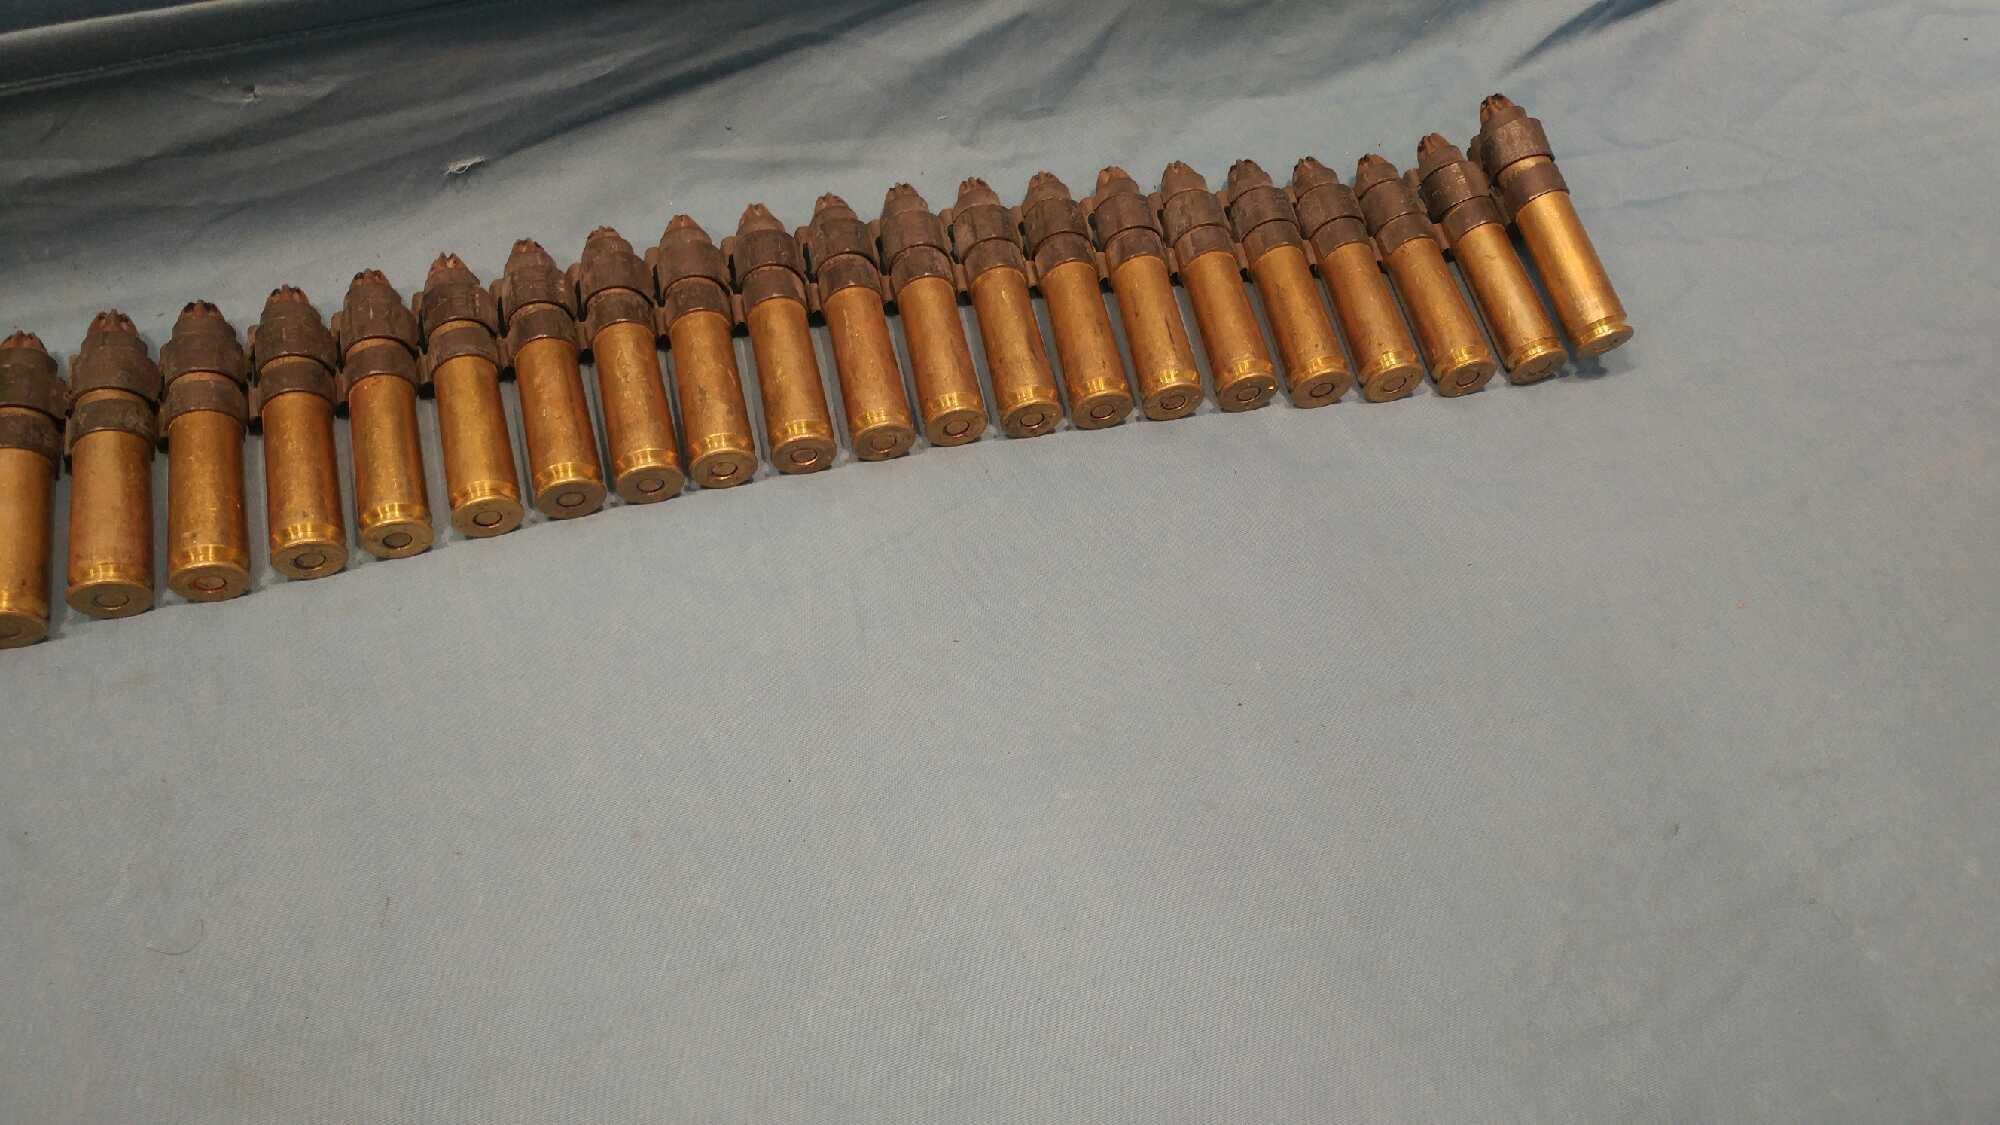 3 foot of ammo on chain